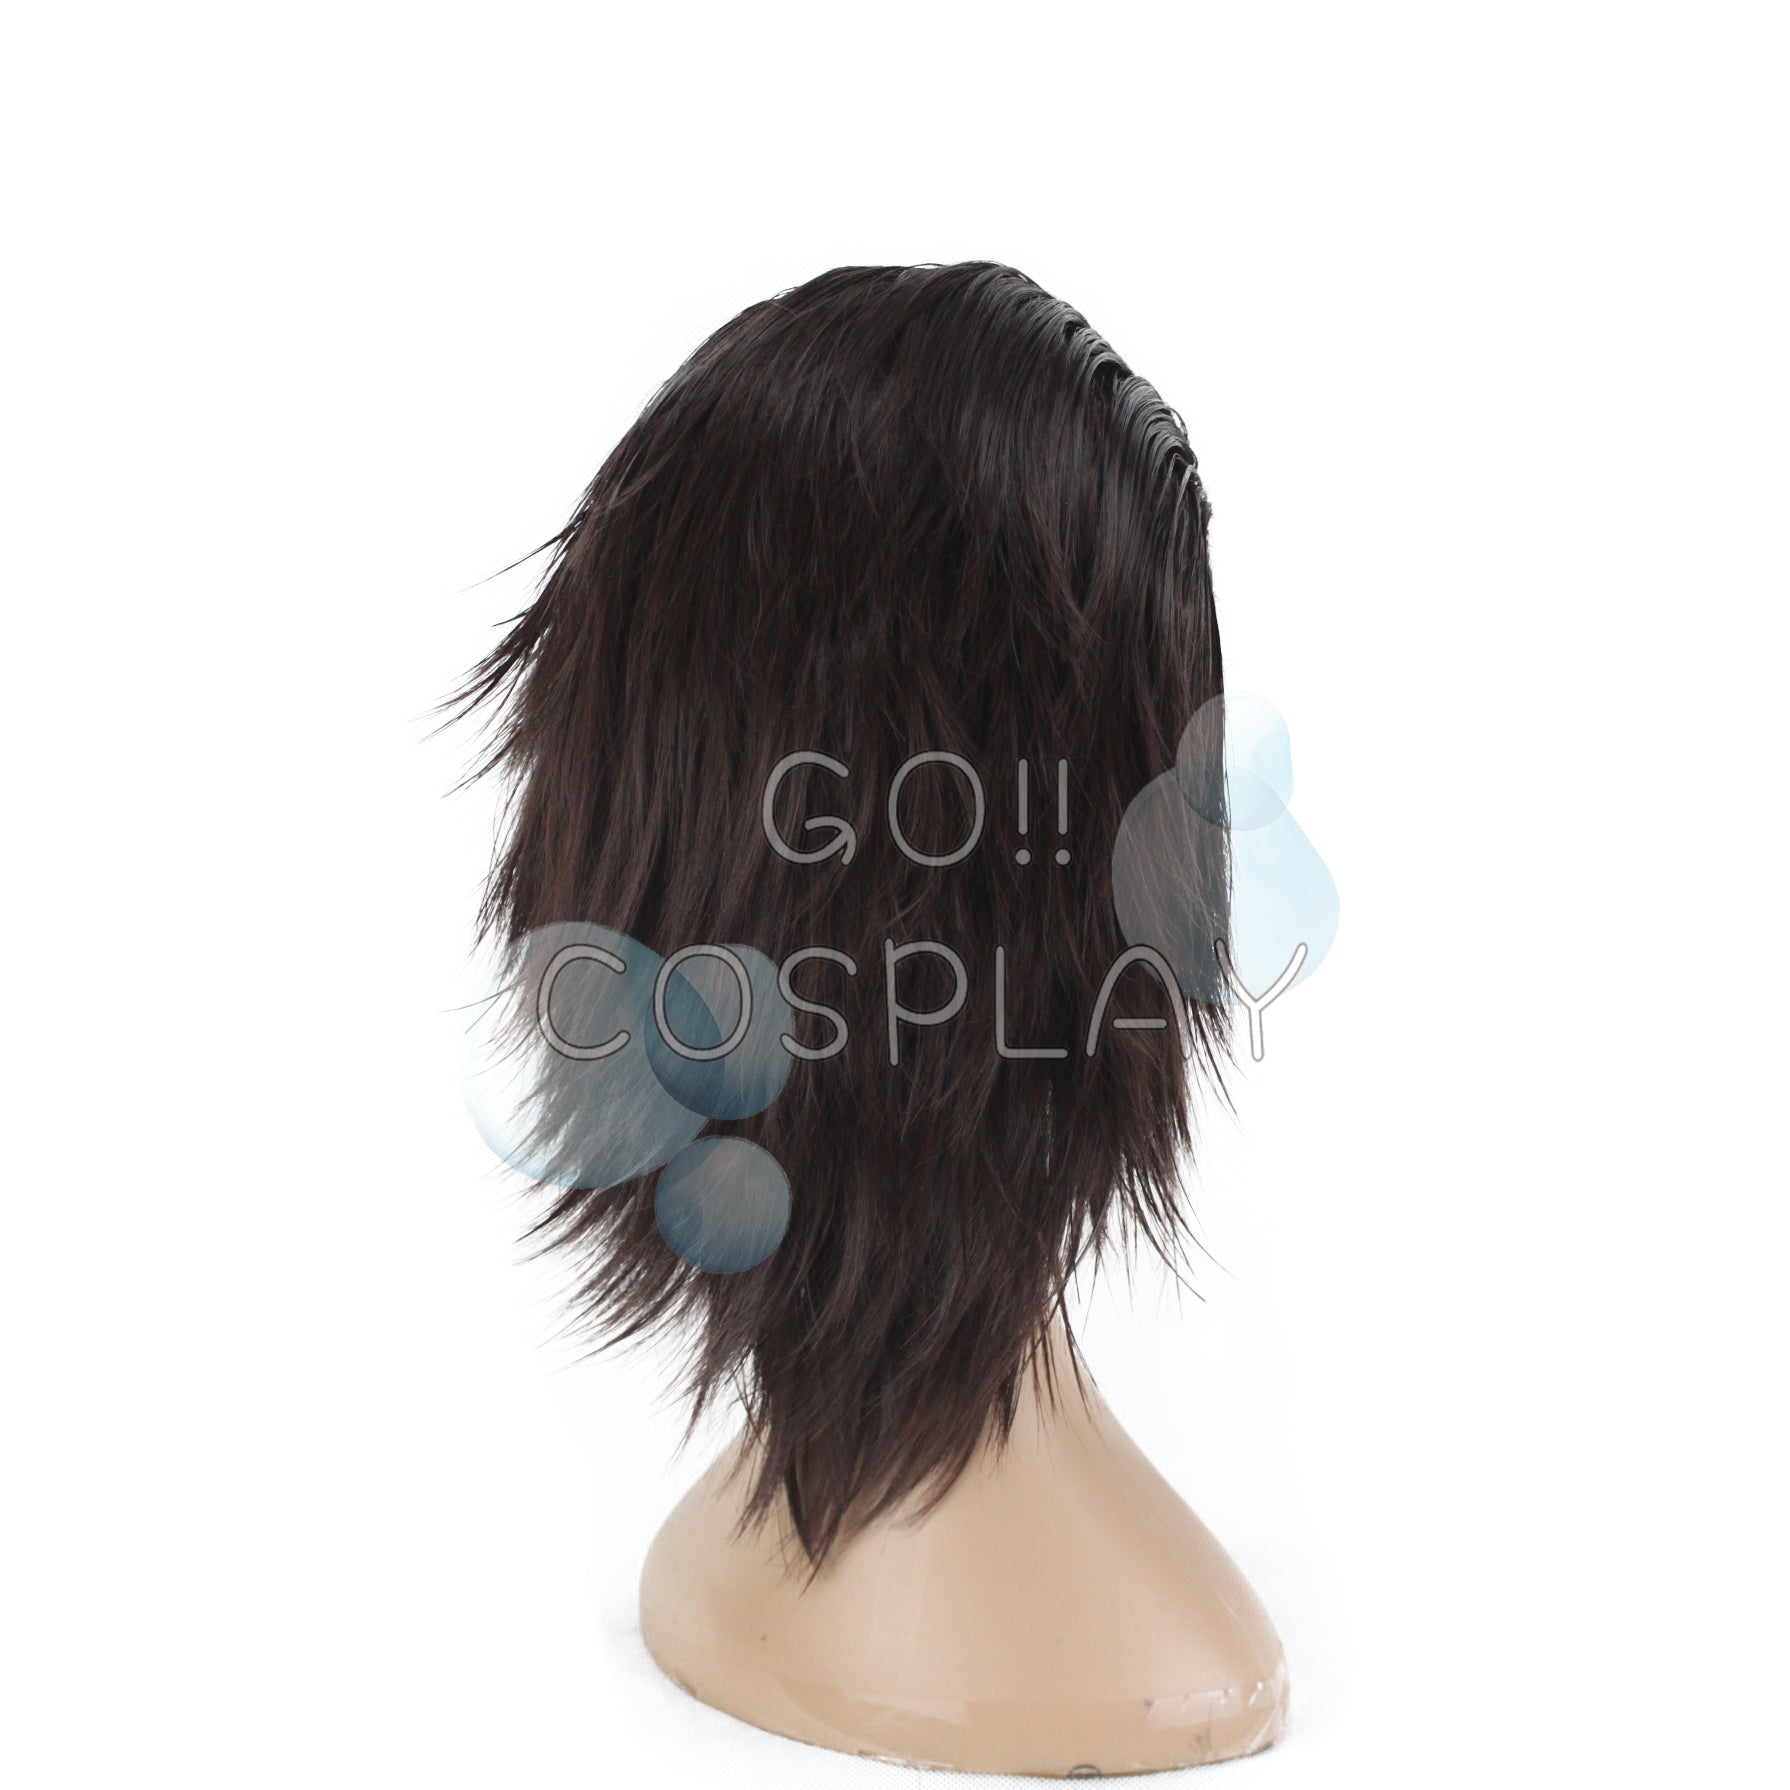 Aizen Cosplay Wig for Sale